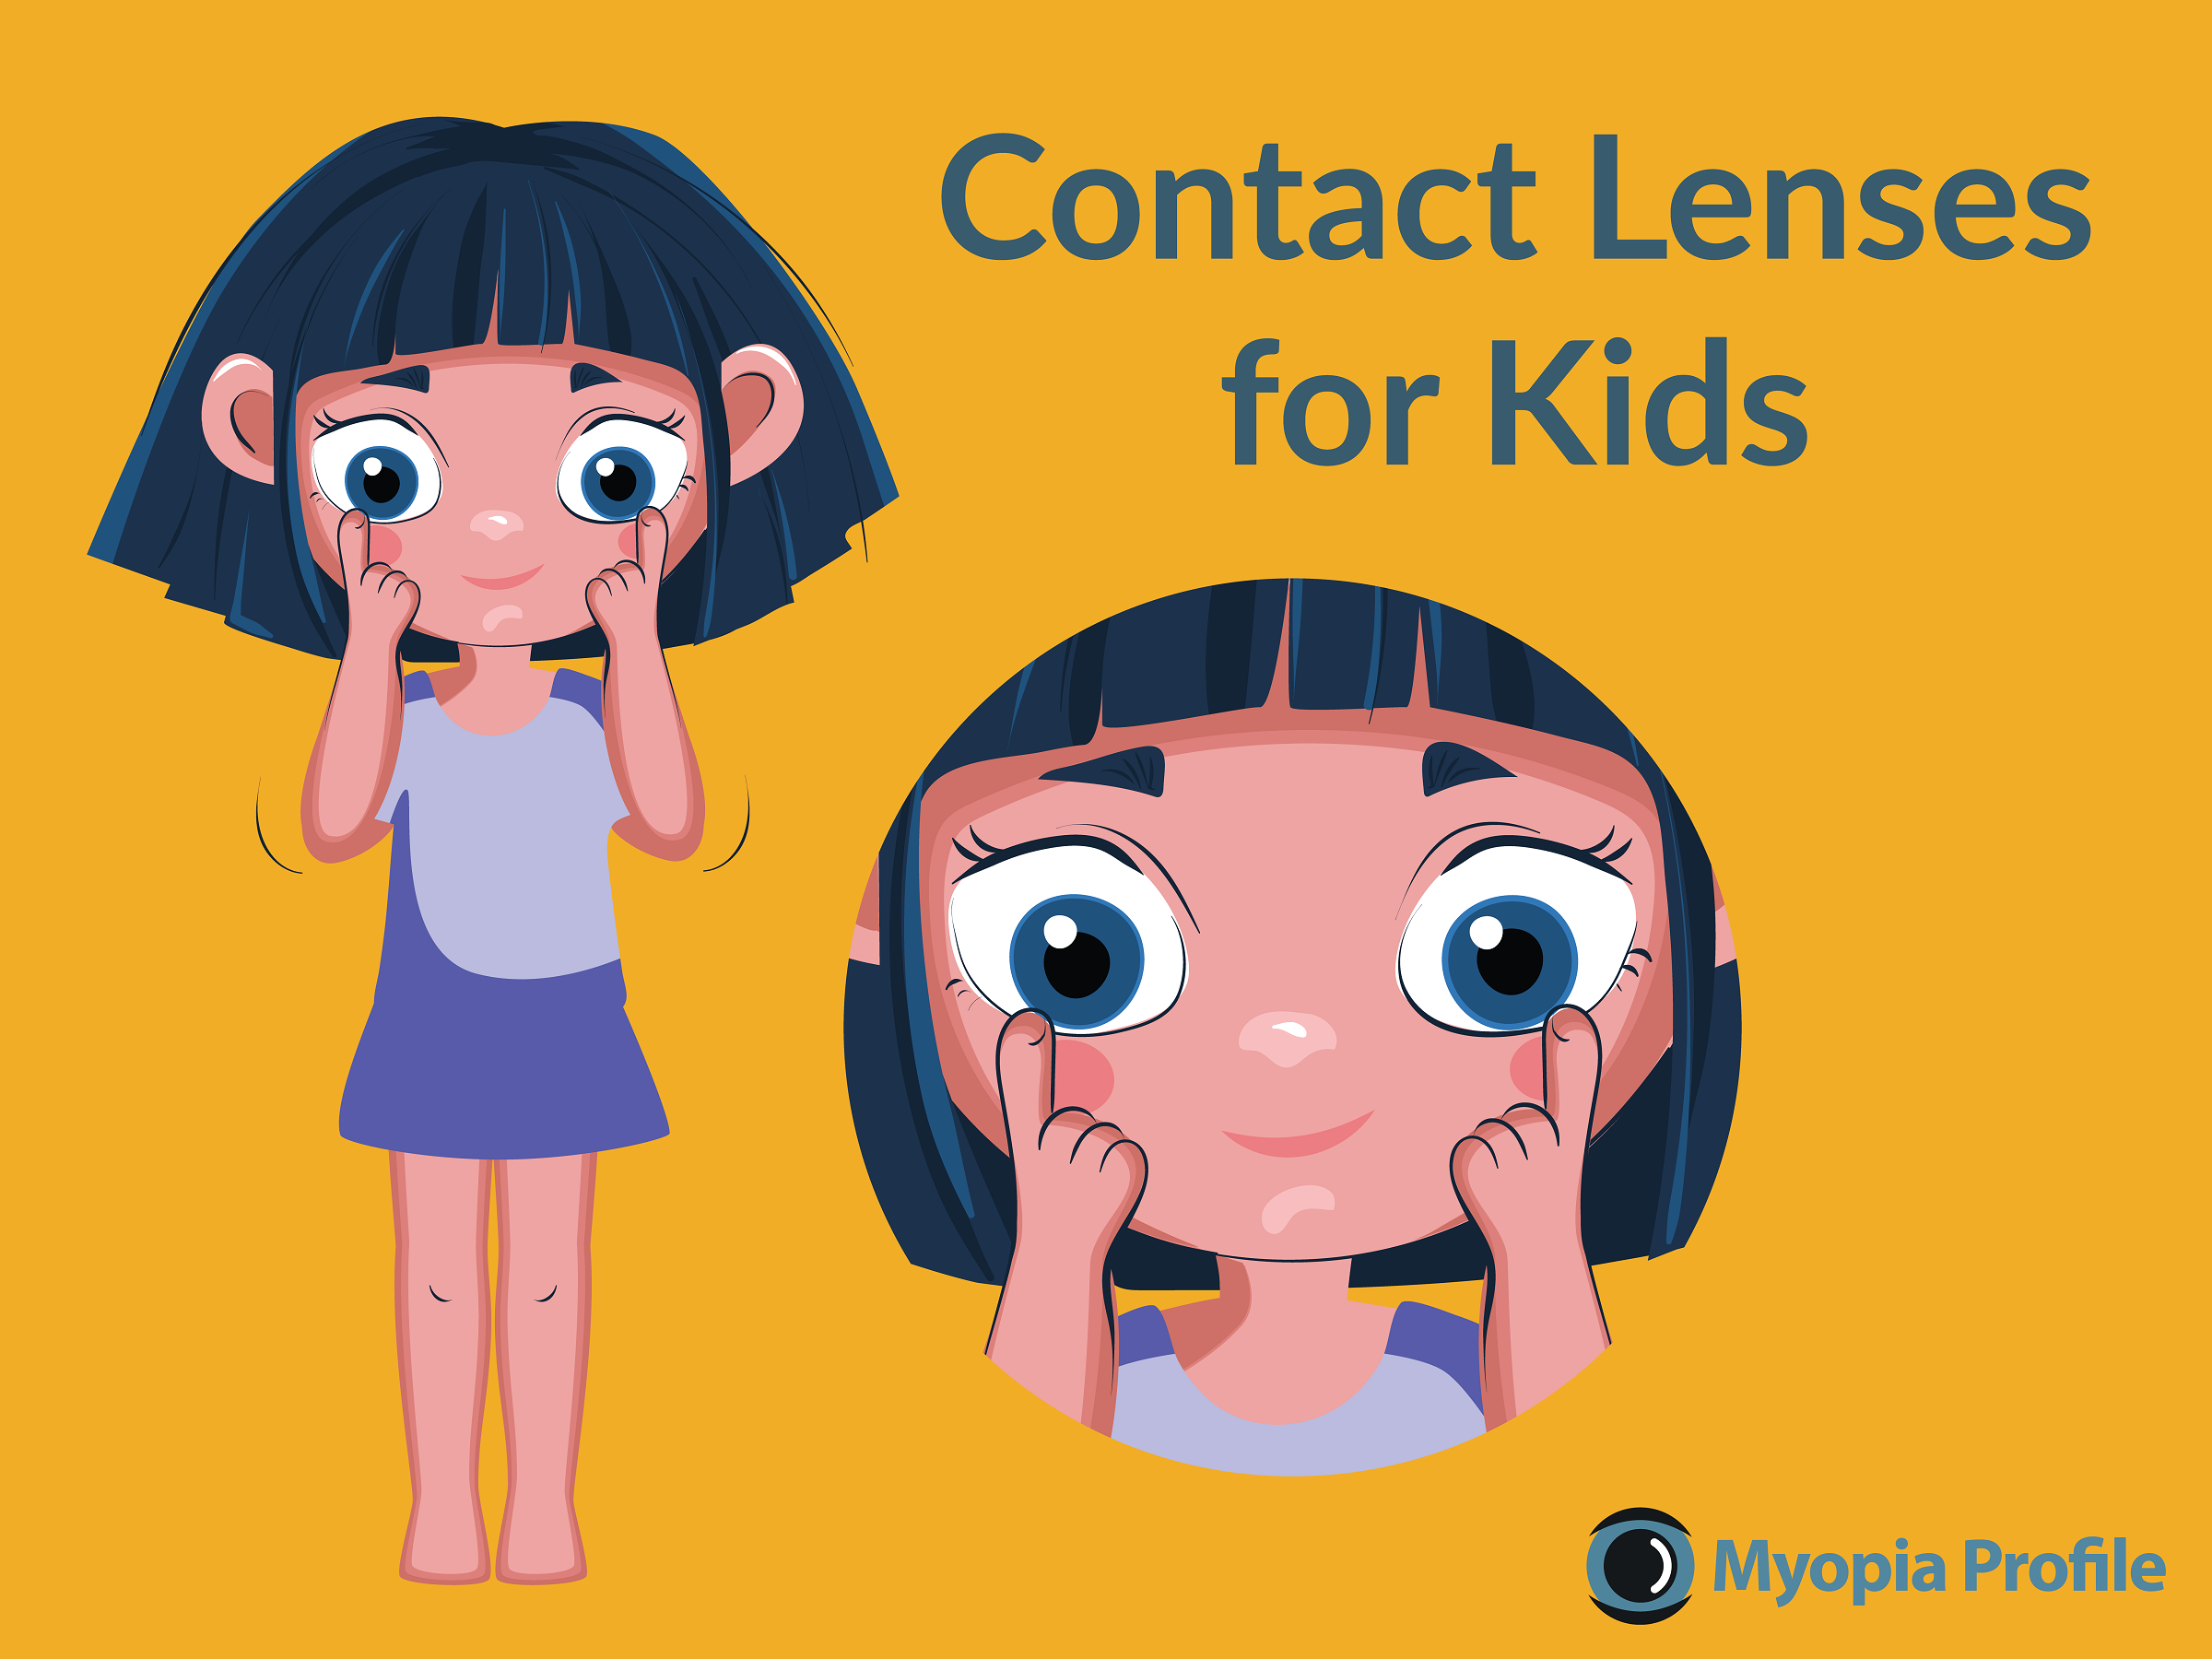 Contact Lenses for Kids